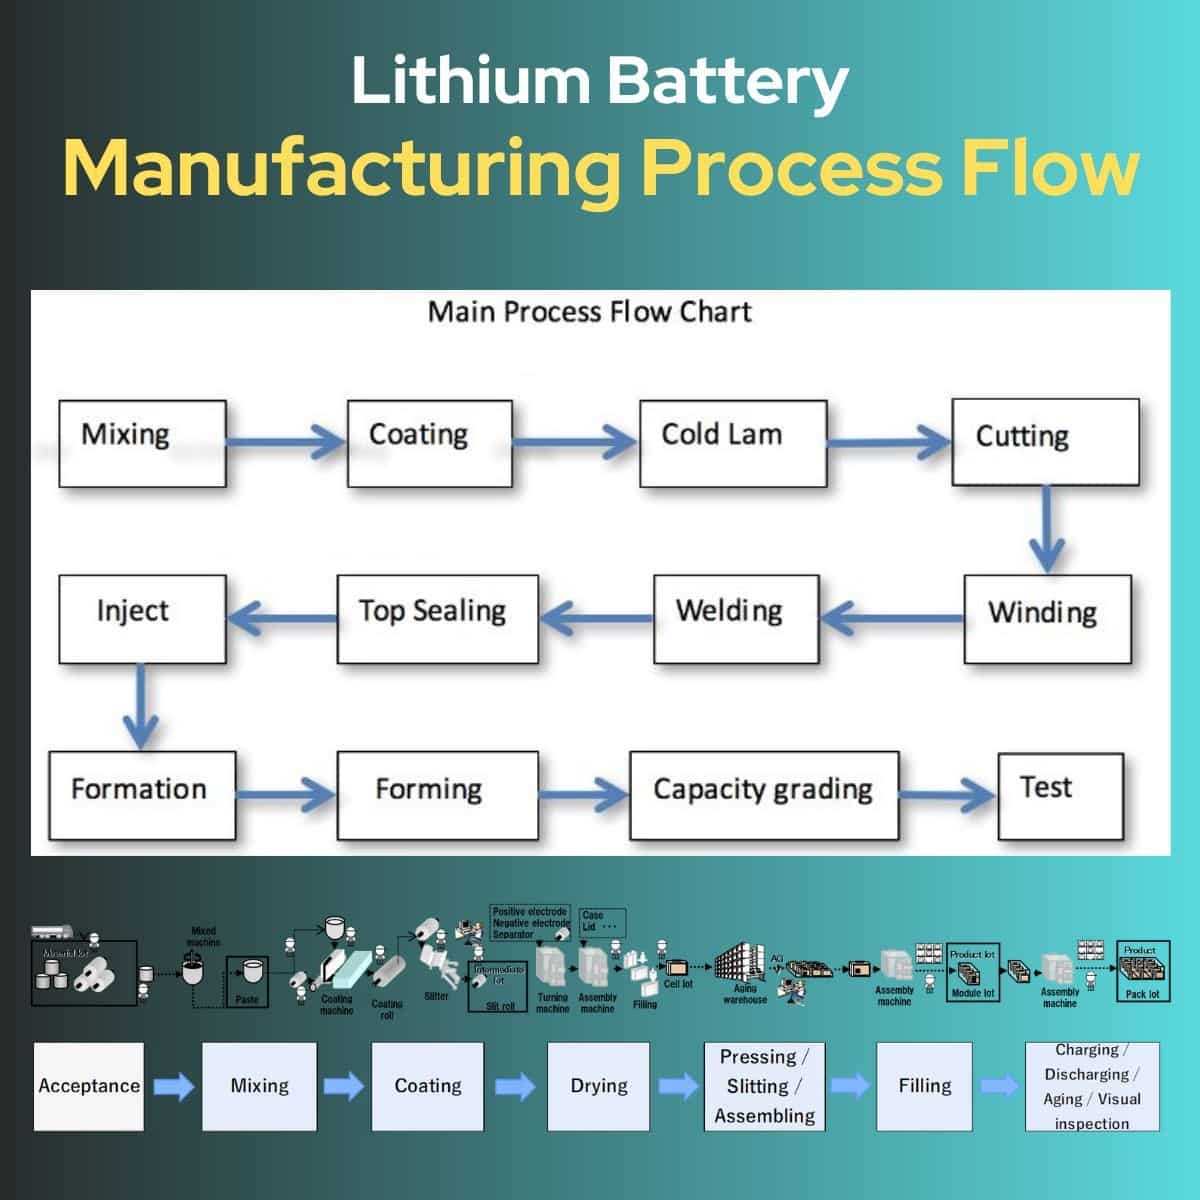 The production of lithium-ion cells